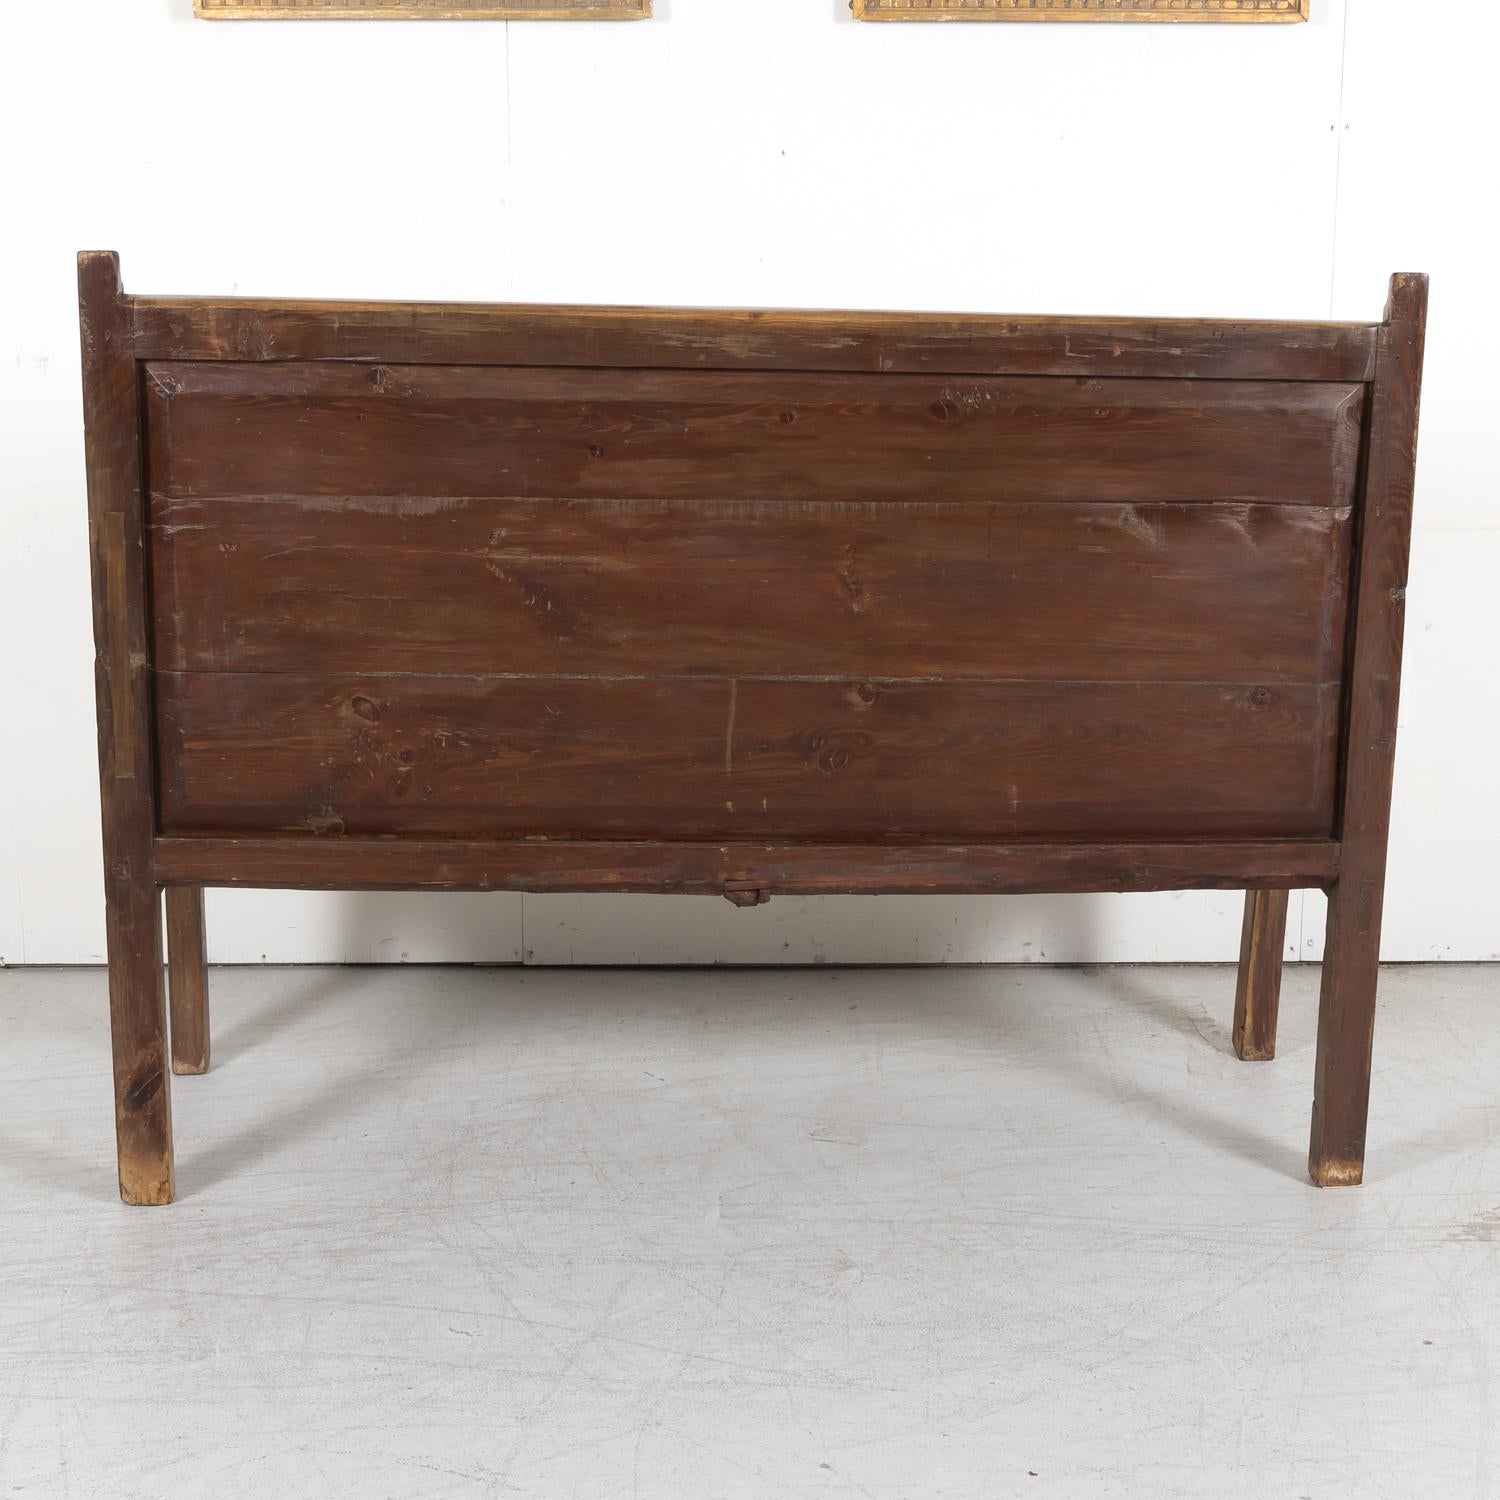 19th Century Rustic Spanish Colonial Pine Hall Bench with Arms 8